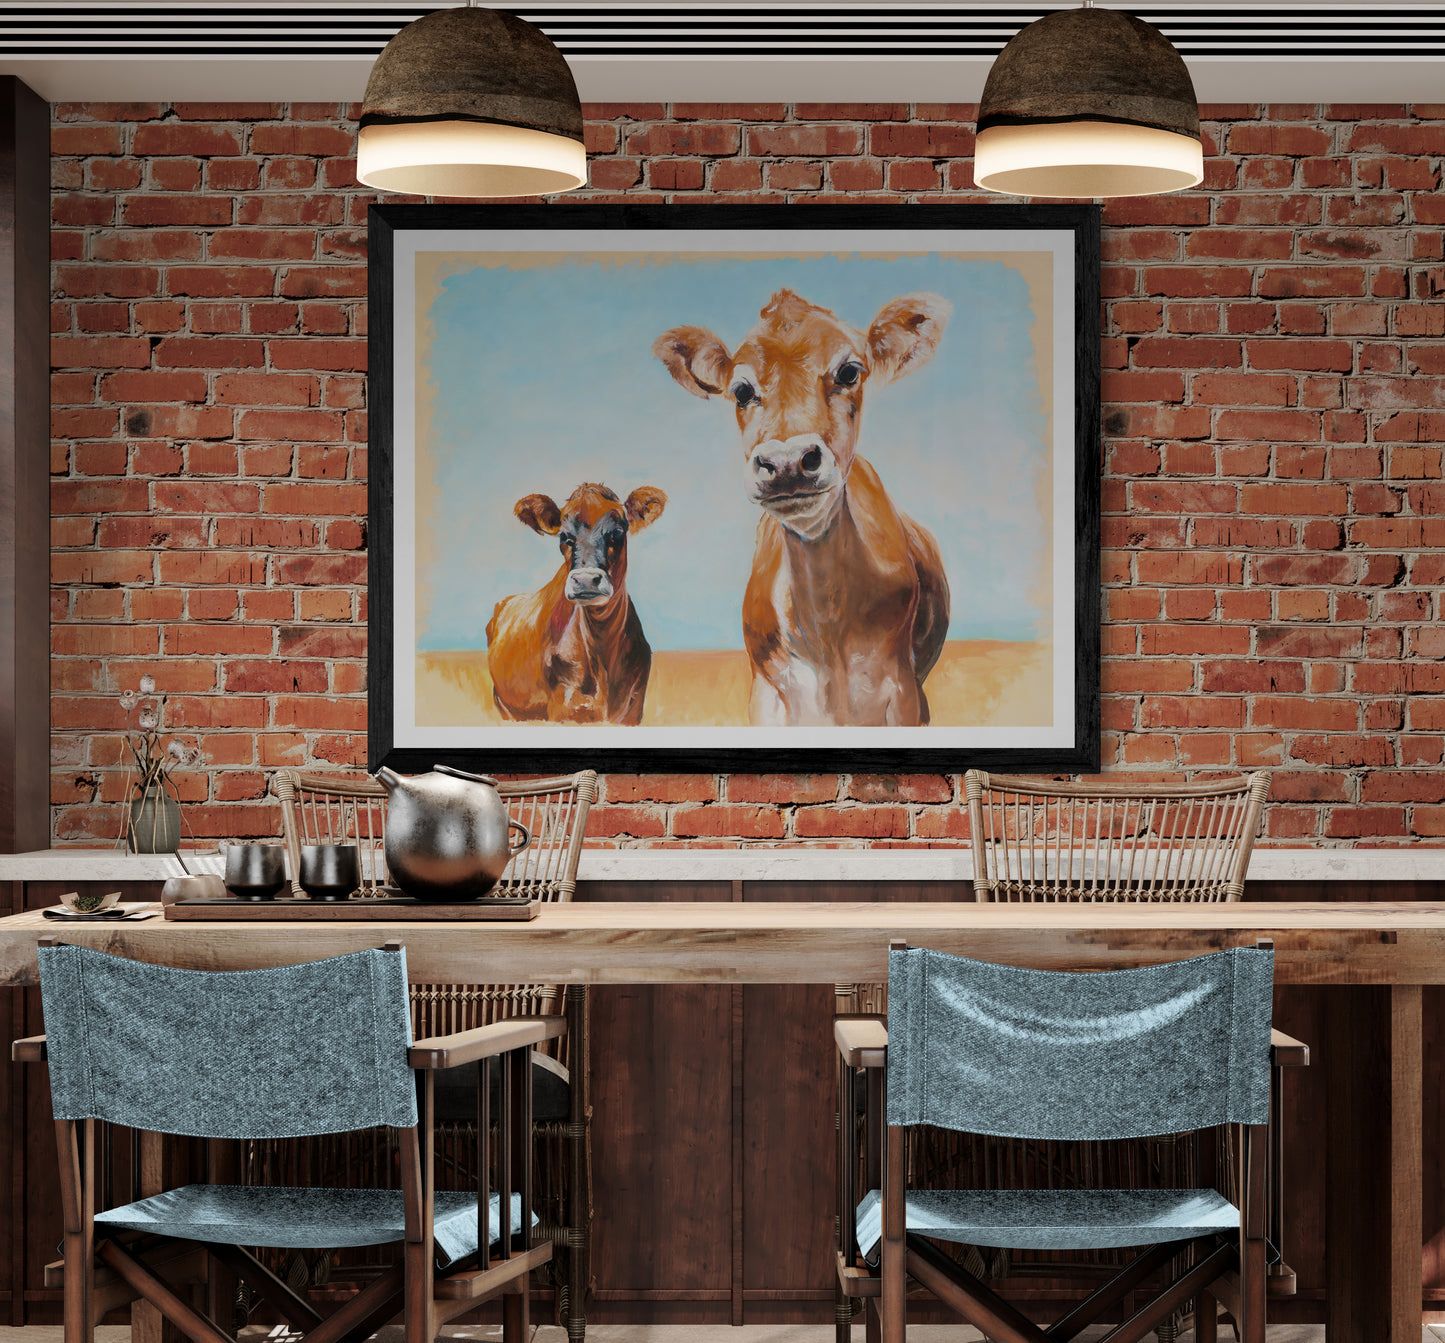 Jersey Cows art print in black frame displayed on brick wall in modern country kitchen